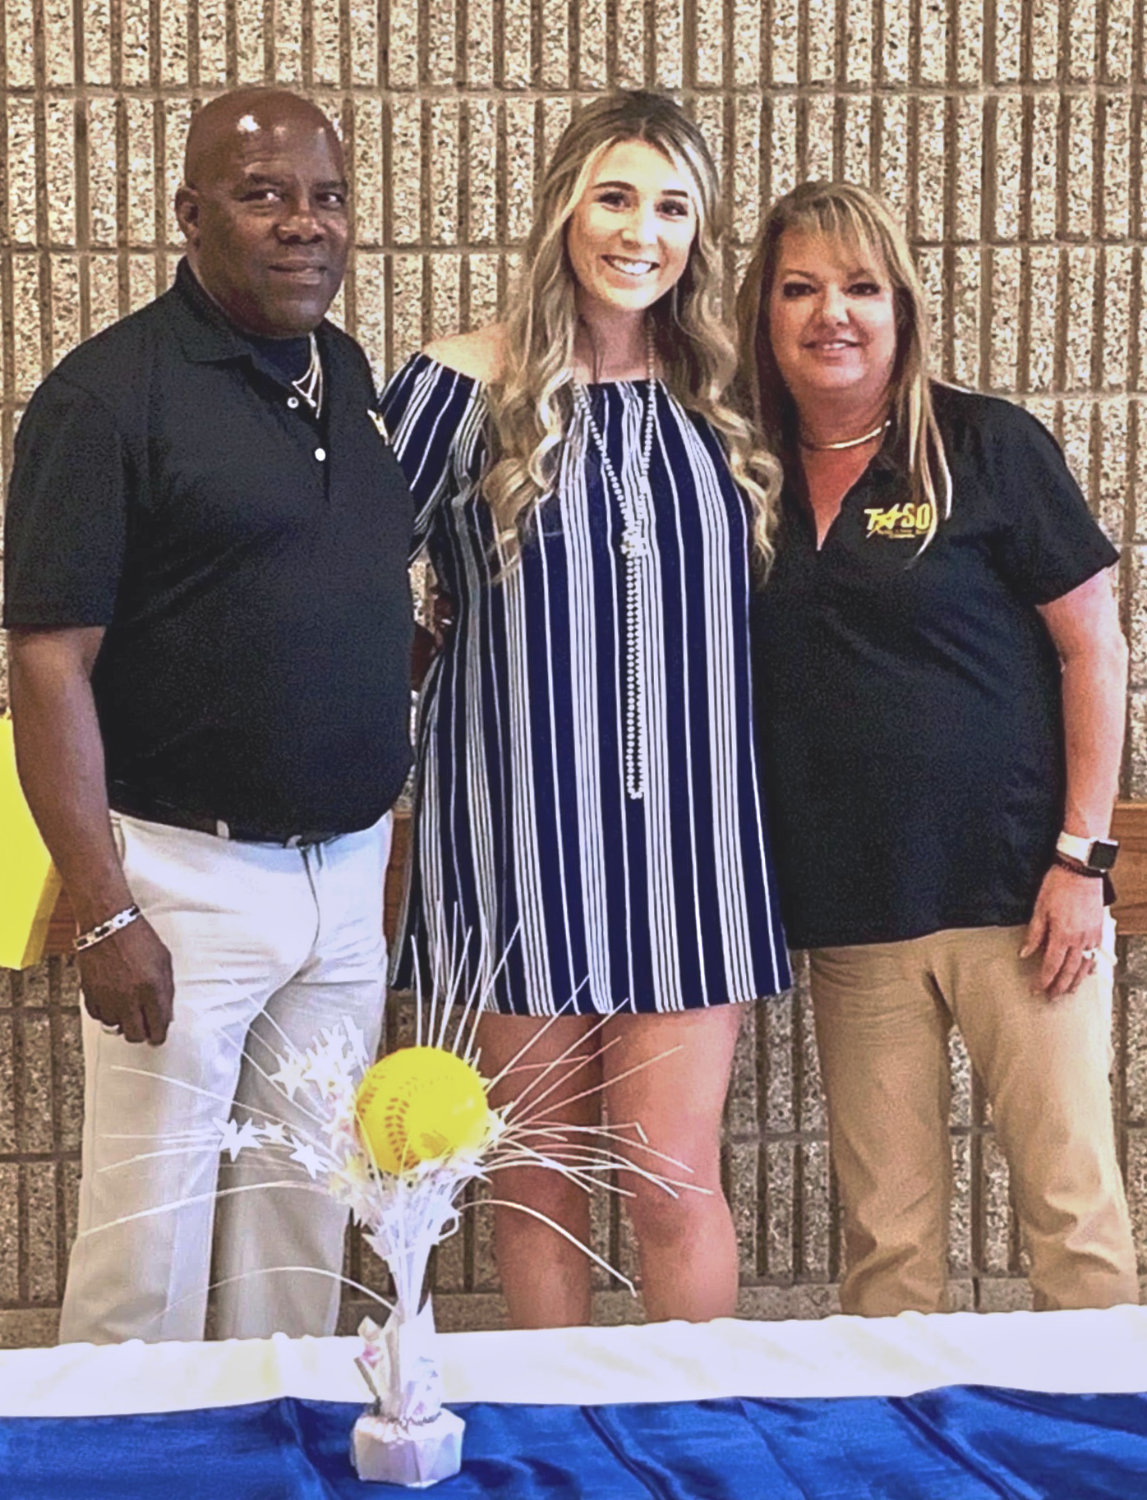 Wiley (center) pictured with Tyler Umpire Association President Oscar Strain (left) and Lisa Rockhill.